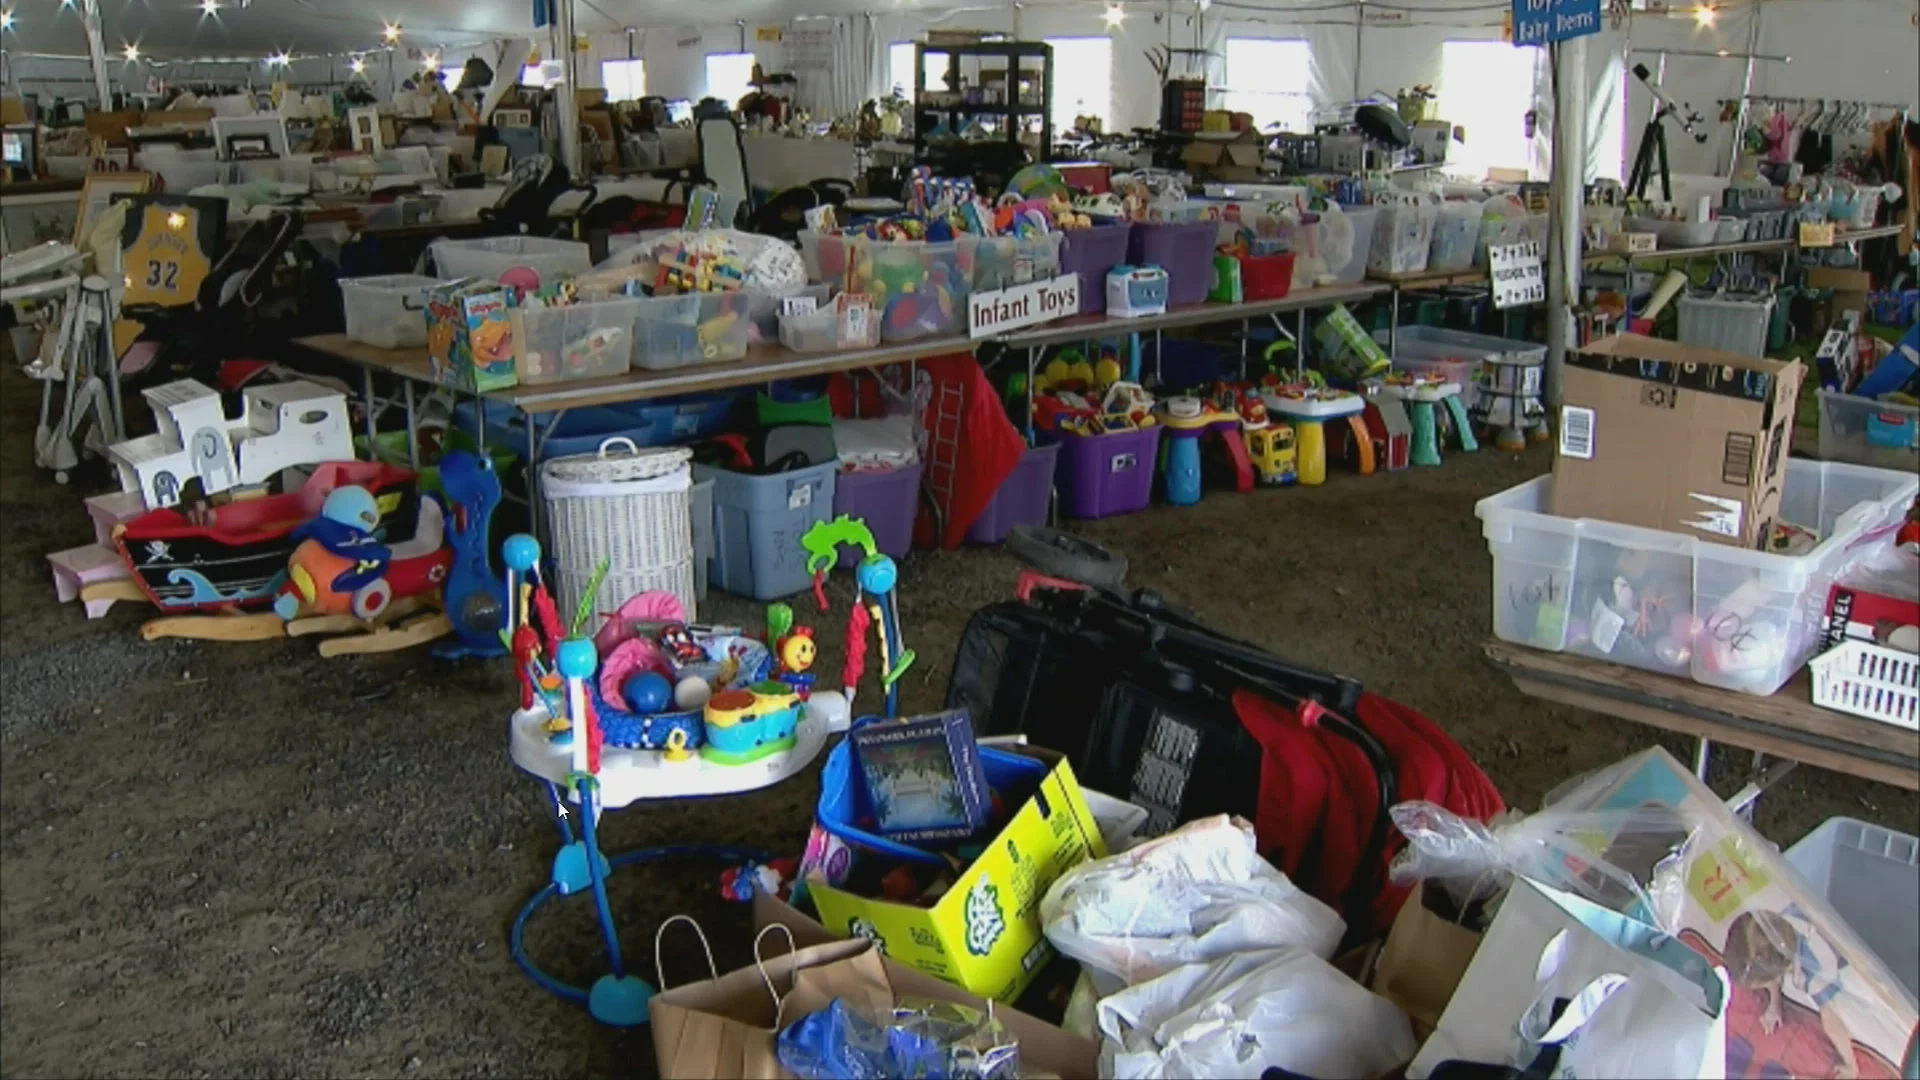 Volunteers prep for Minks to Sinks sale to benefit Family and Children's Agency